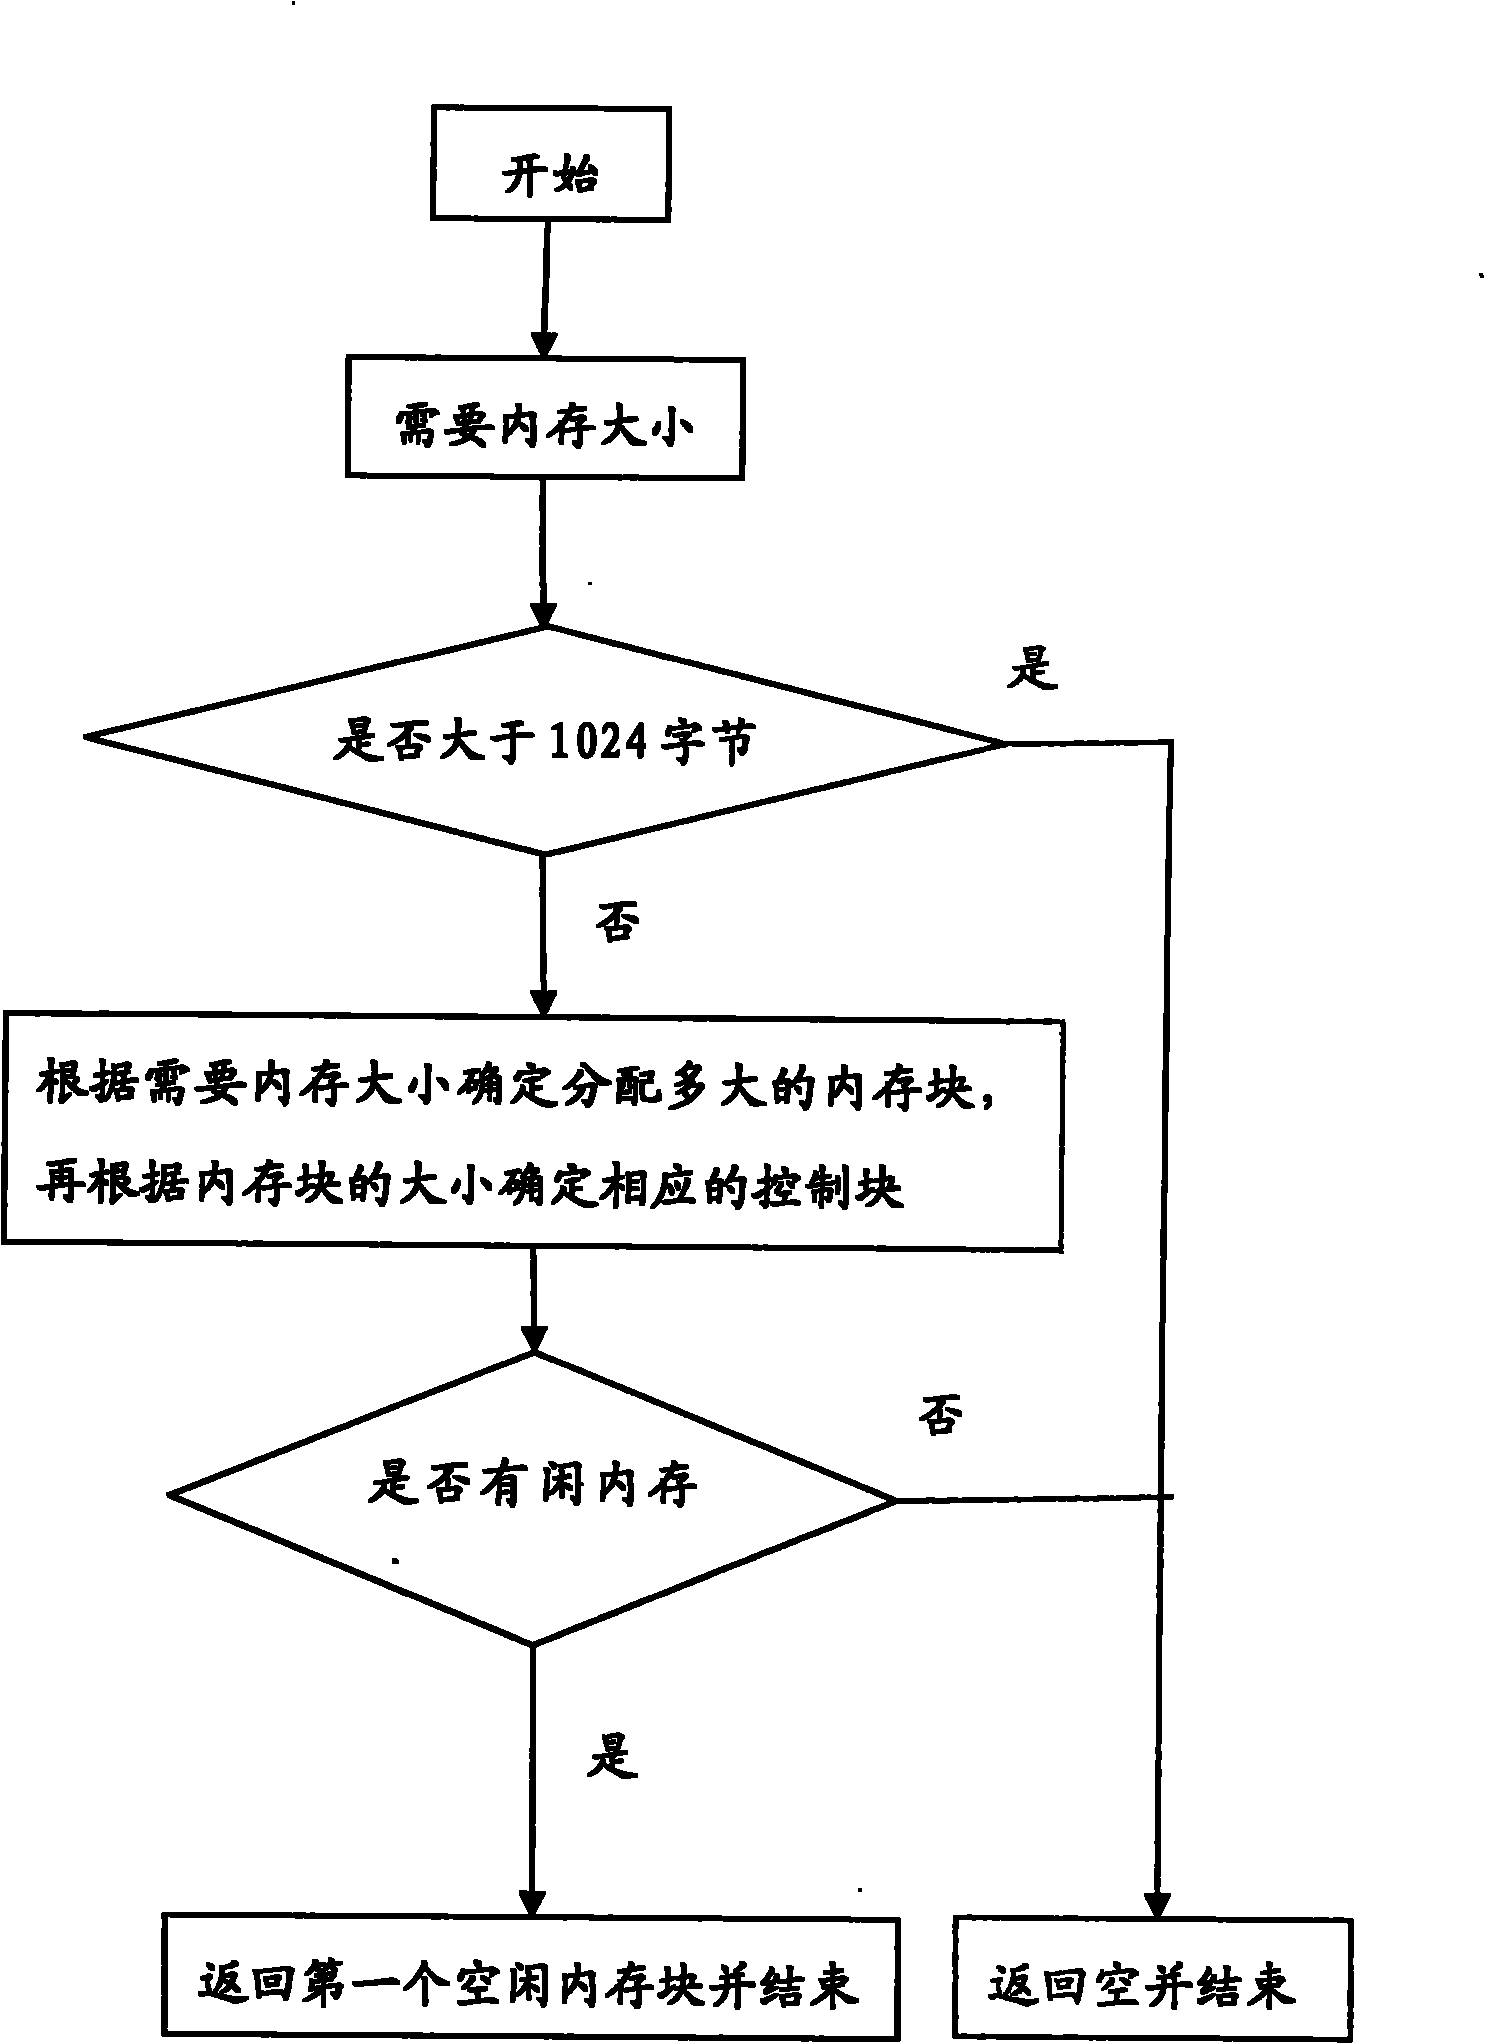 Memory management method and system